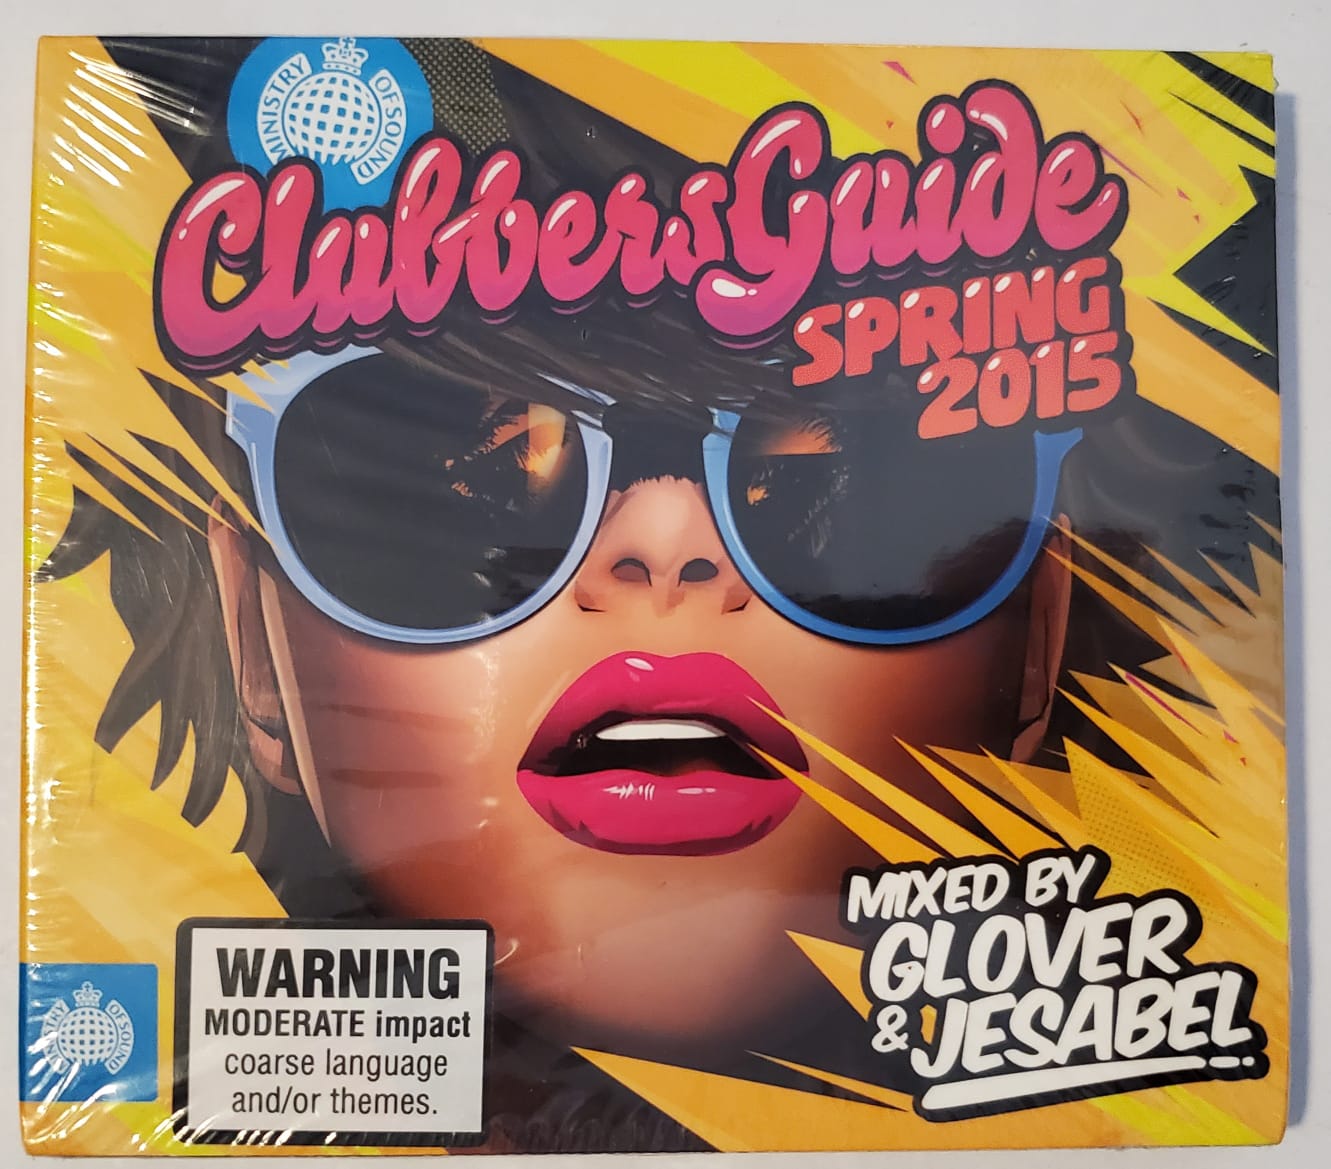 CD Compilado | Clubers Guide Pring 2015 (Mixed my Glover Jesabel) [CDx2]